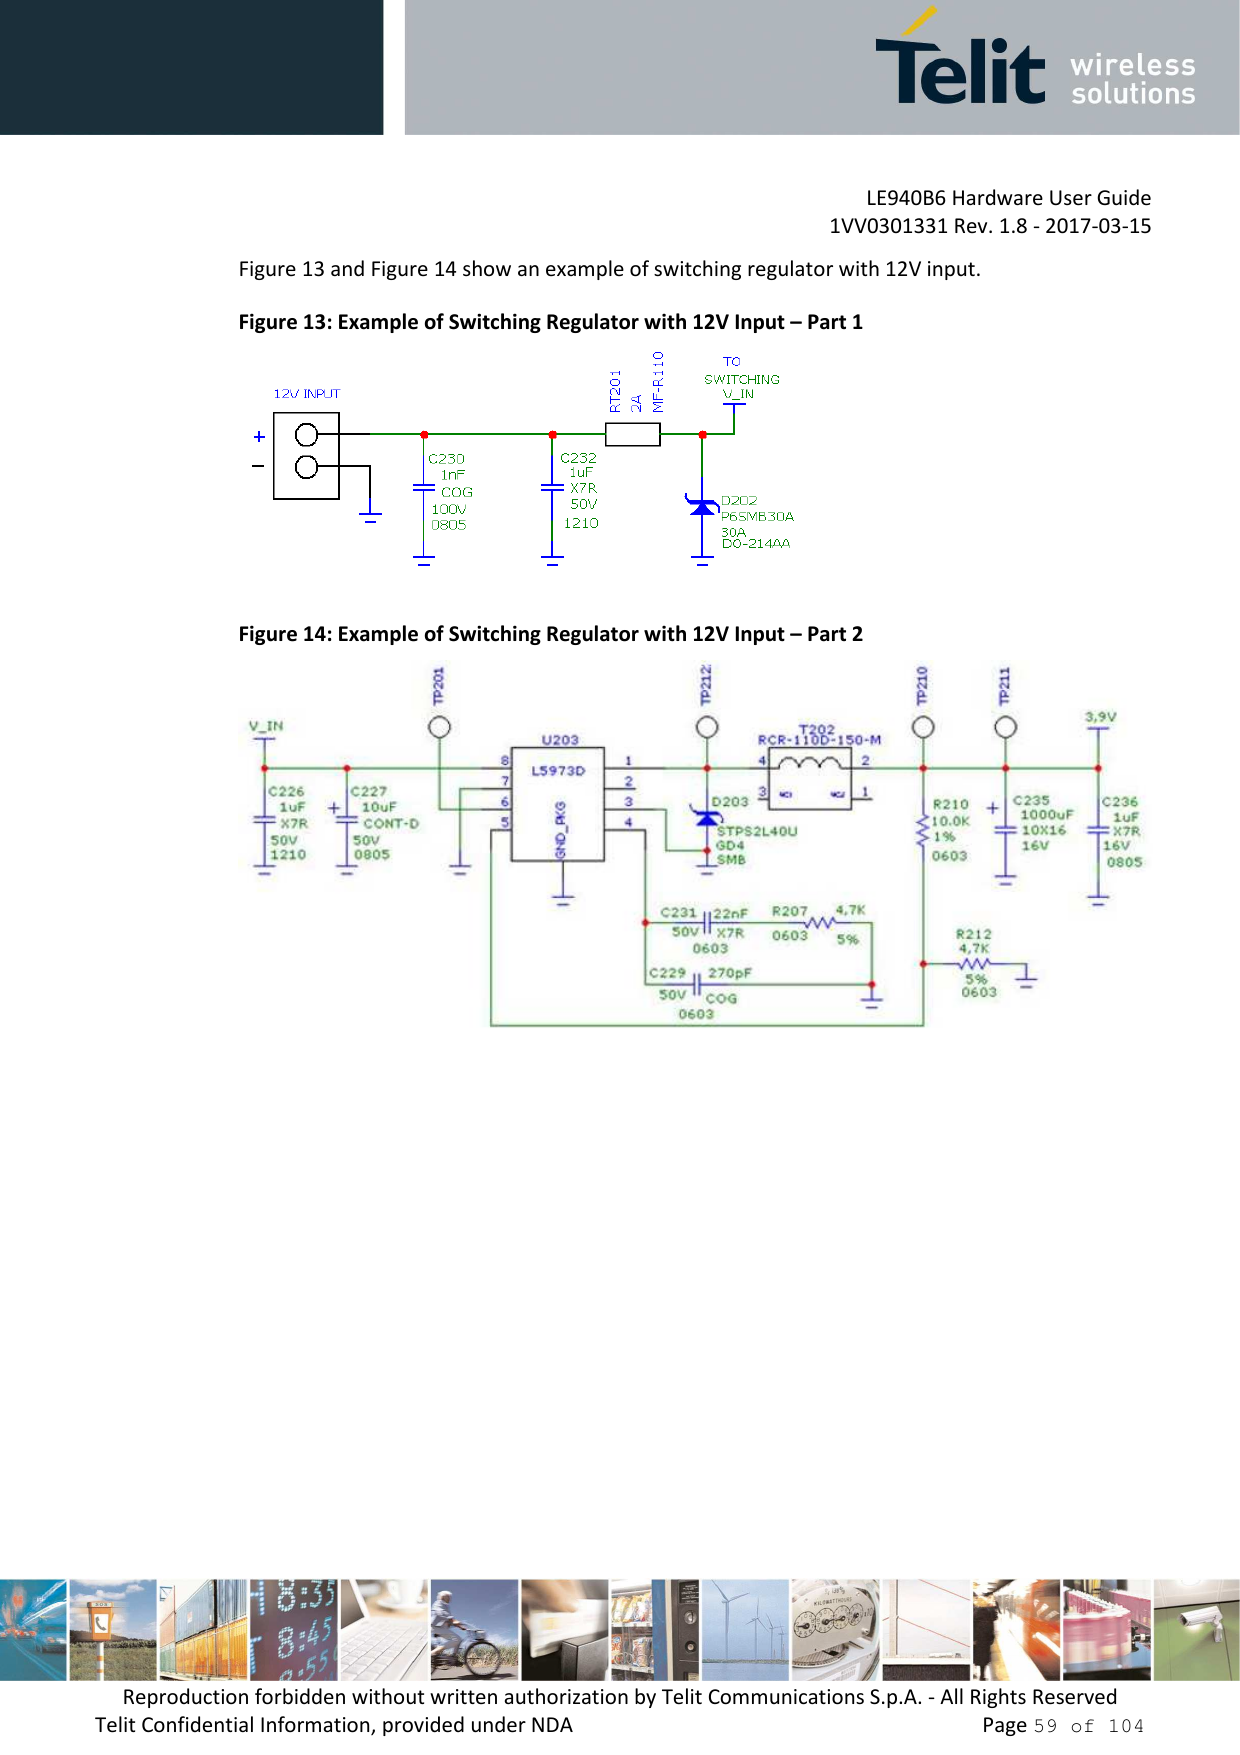         LE940B6 Hardware User Guide     1VV0301331 Rev. 1.8 - 2017-03-15 Reproduction forbidden without written authorization by Telit Communications S.p.A. - All Rights Reserved Telit Confidential Information, provided under NDA                 Page 59 of 104 Figure 13 and Figure 14 show an example of switching regulator with 12V input. Figure 13: Example of Switching Regulator with 12V Input – Part 1  Figure 14: Example of Switching Regulator with 12V Input – Part 2     